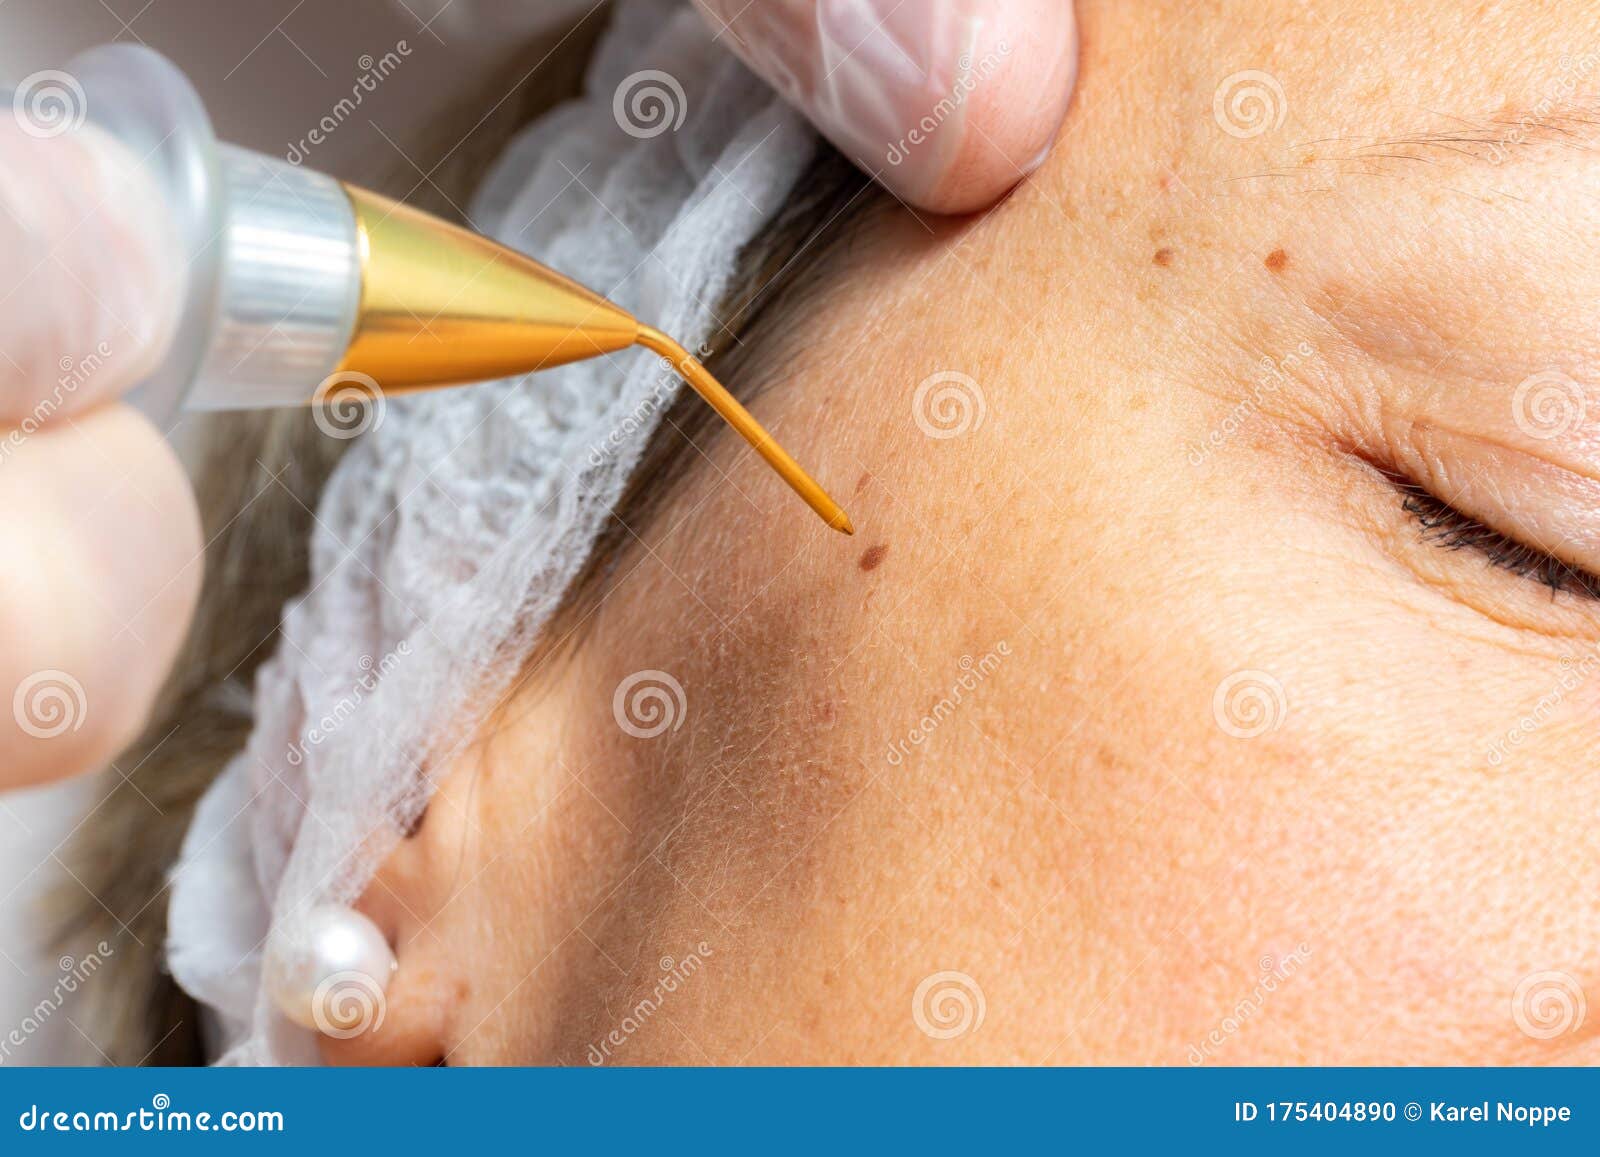 macro close up of laser plasma pen removing facial wart on middle aged woman